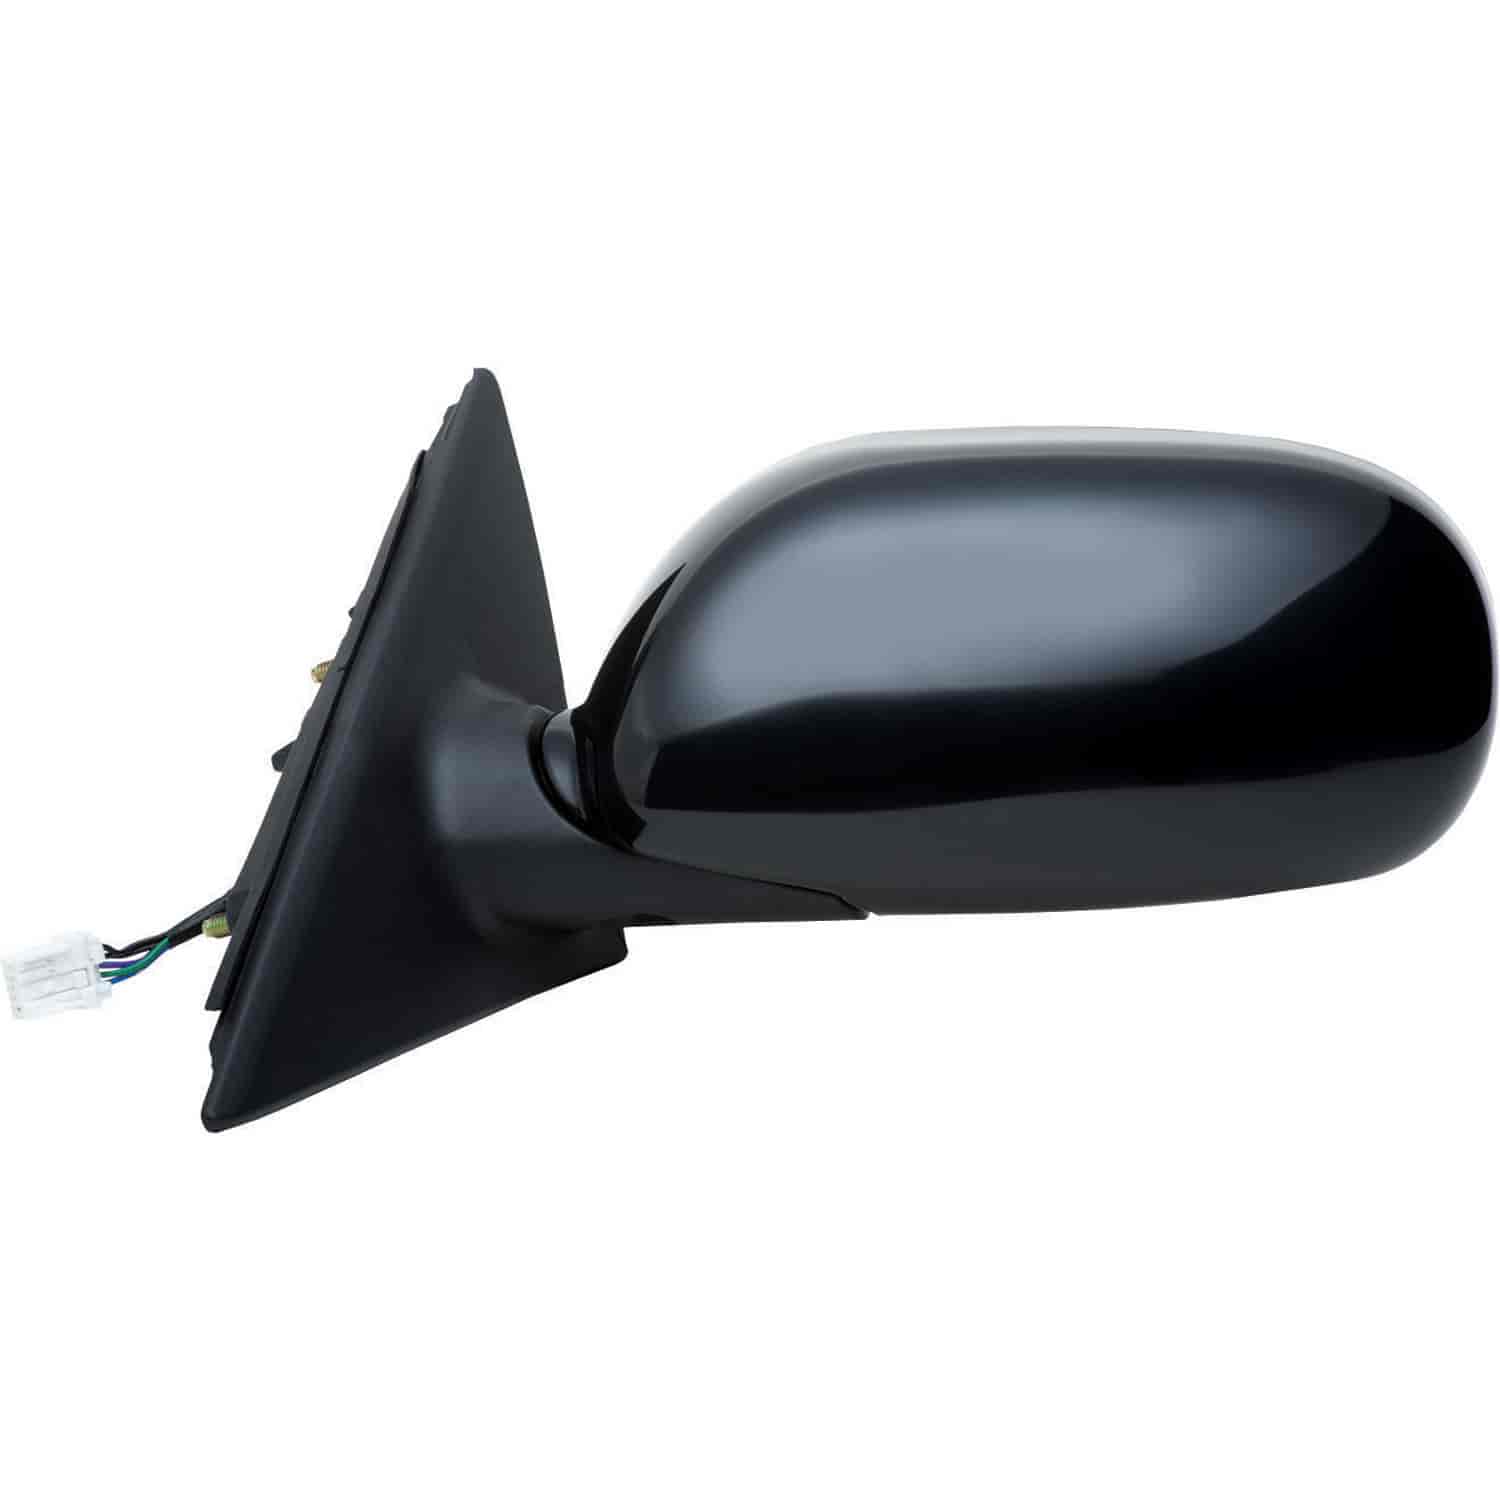 OEM Style Replacement mirror for 03-06 INFINITY G35